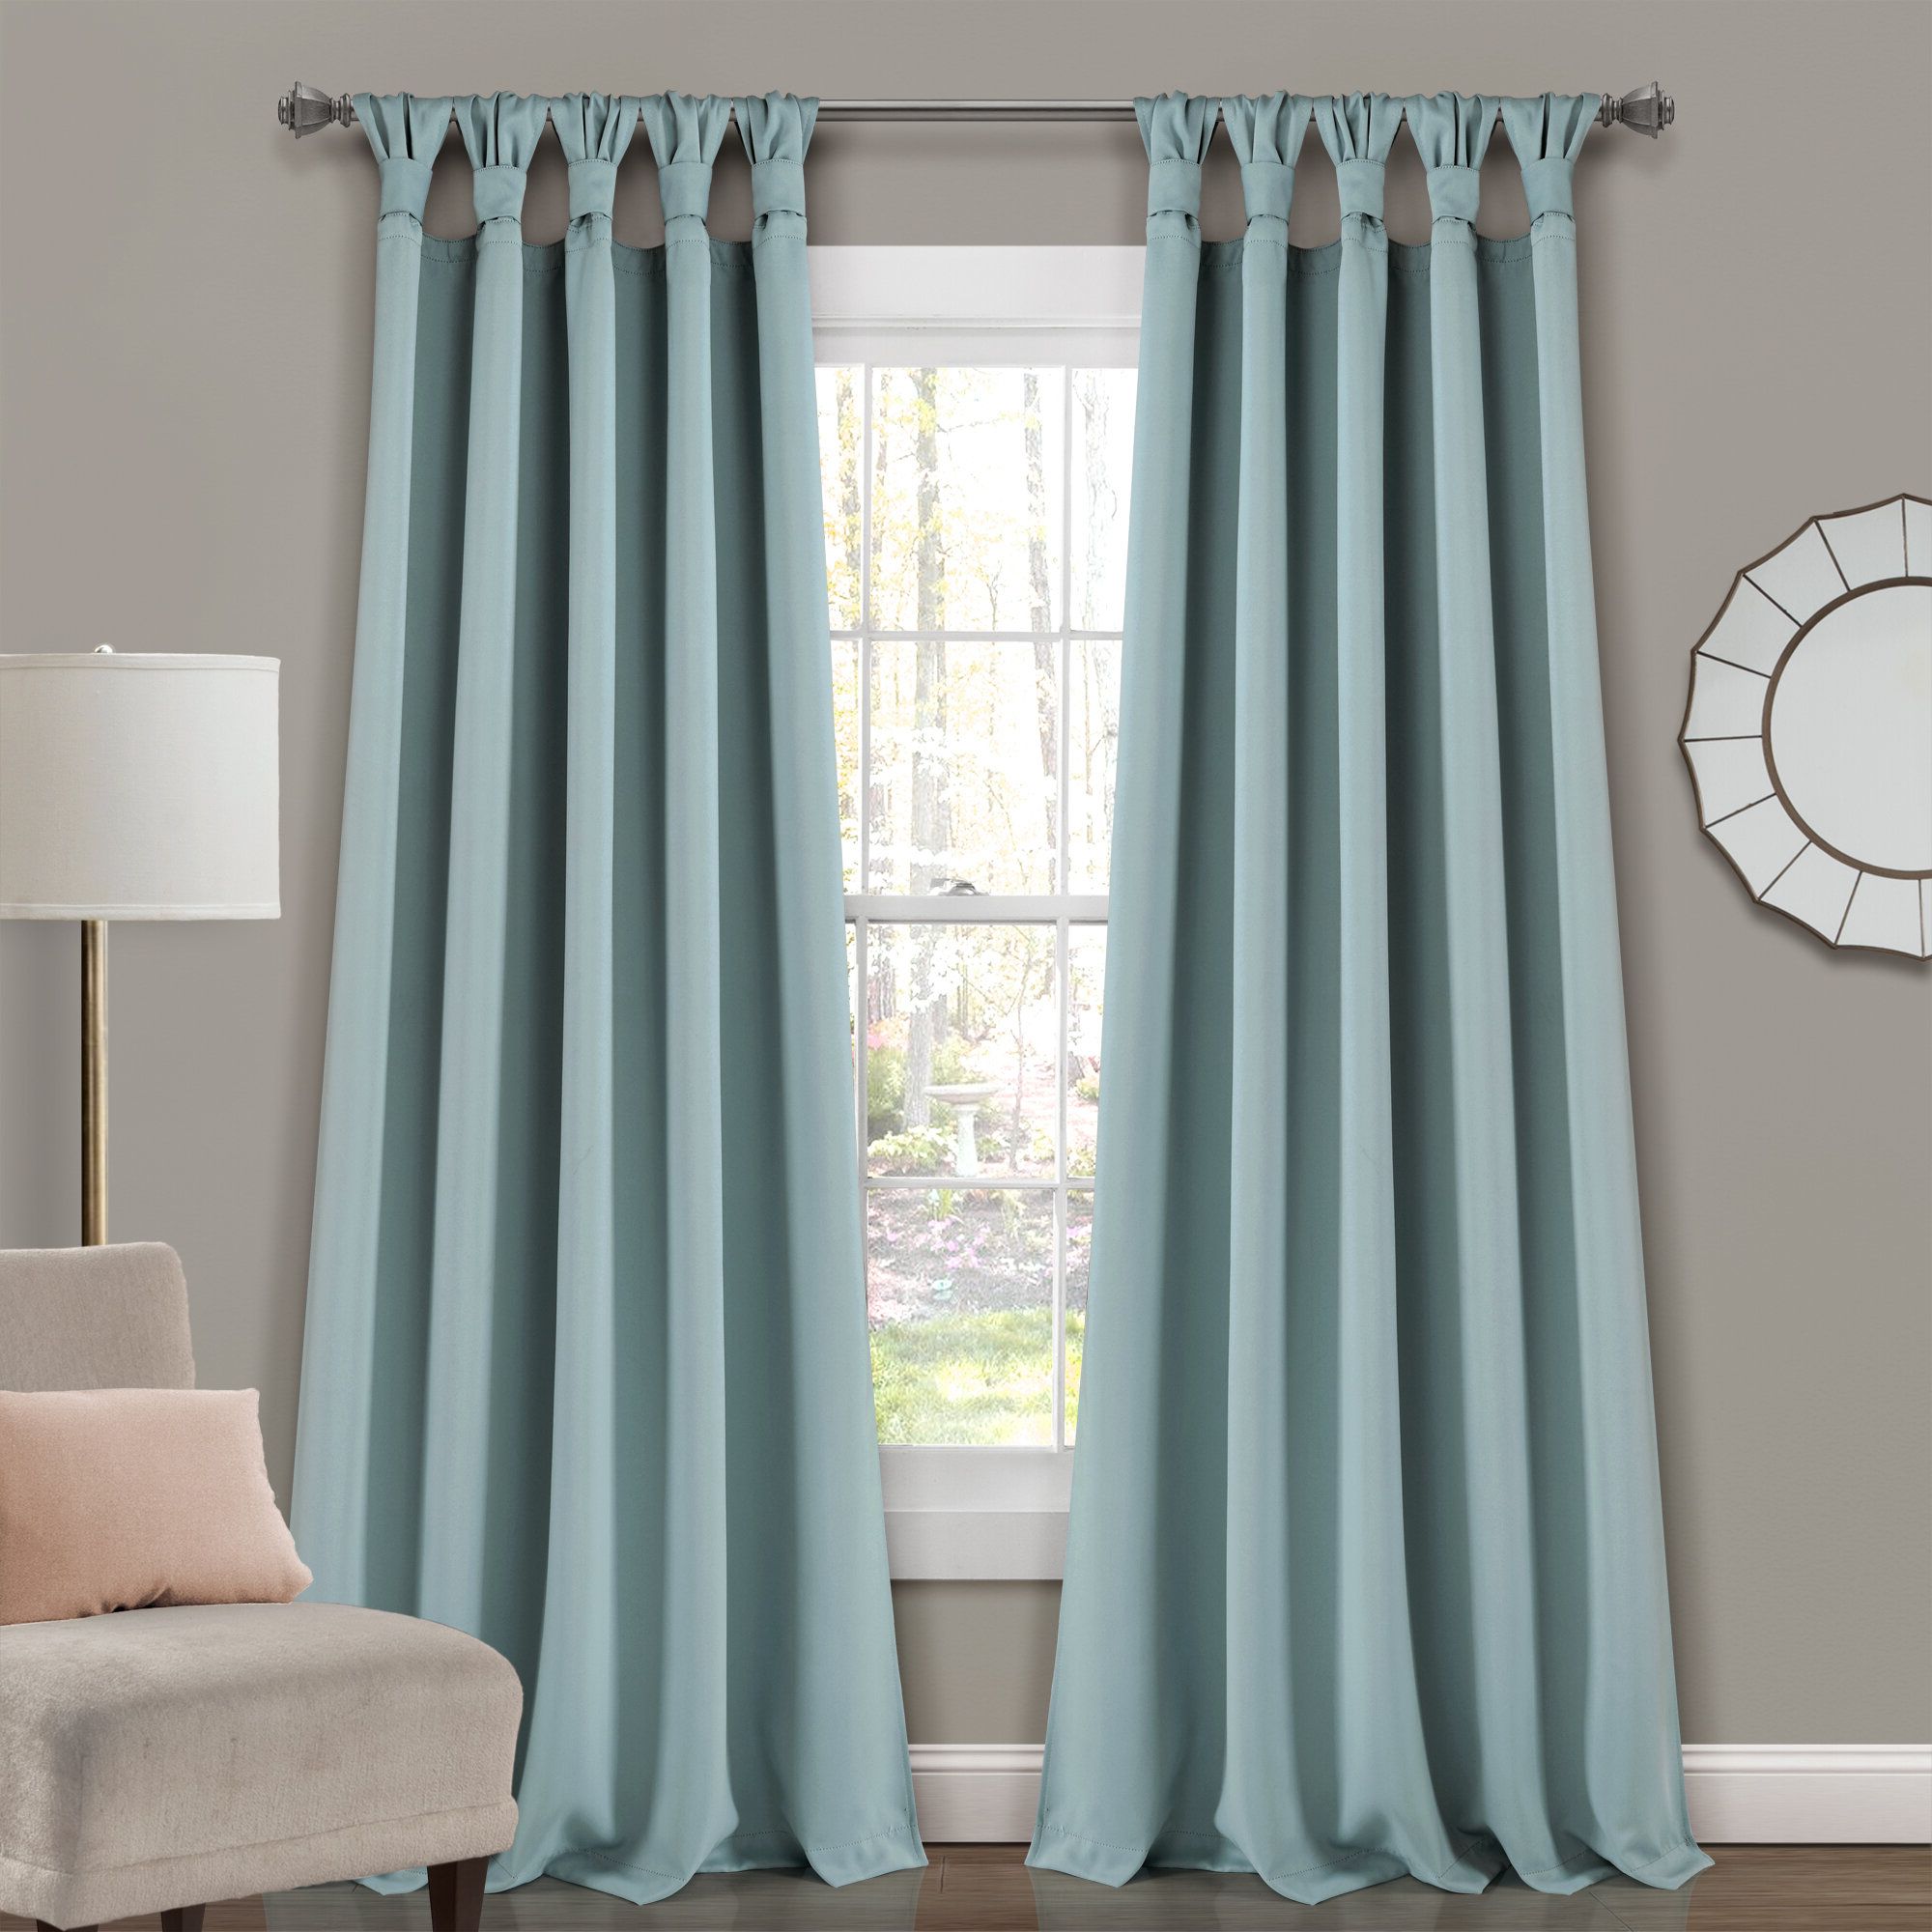 Guthridge Knotted Tab Top Solid Color Thermal Blackout Panel Pair With Regard To 2021 Knotted Tab Top Window Curtain Panel Pairs (View 10 of 20)